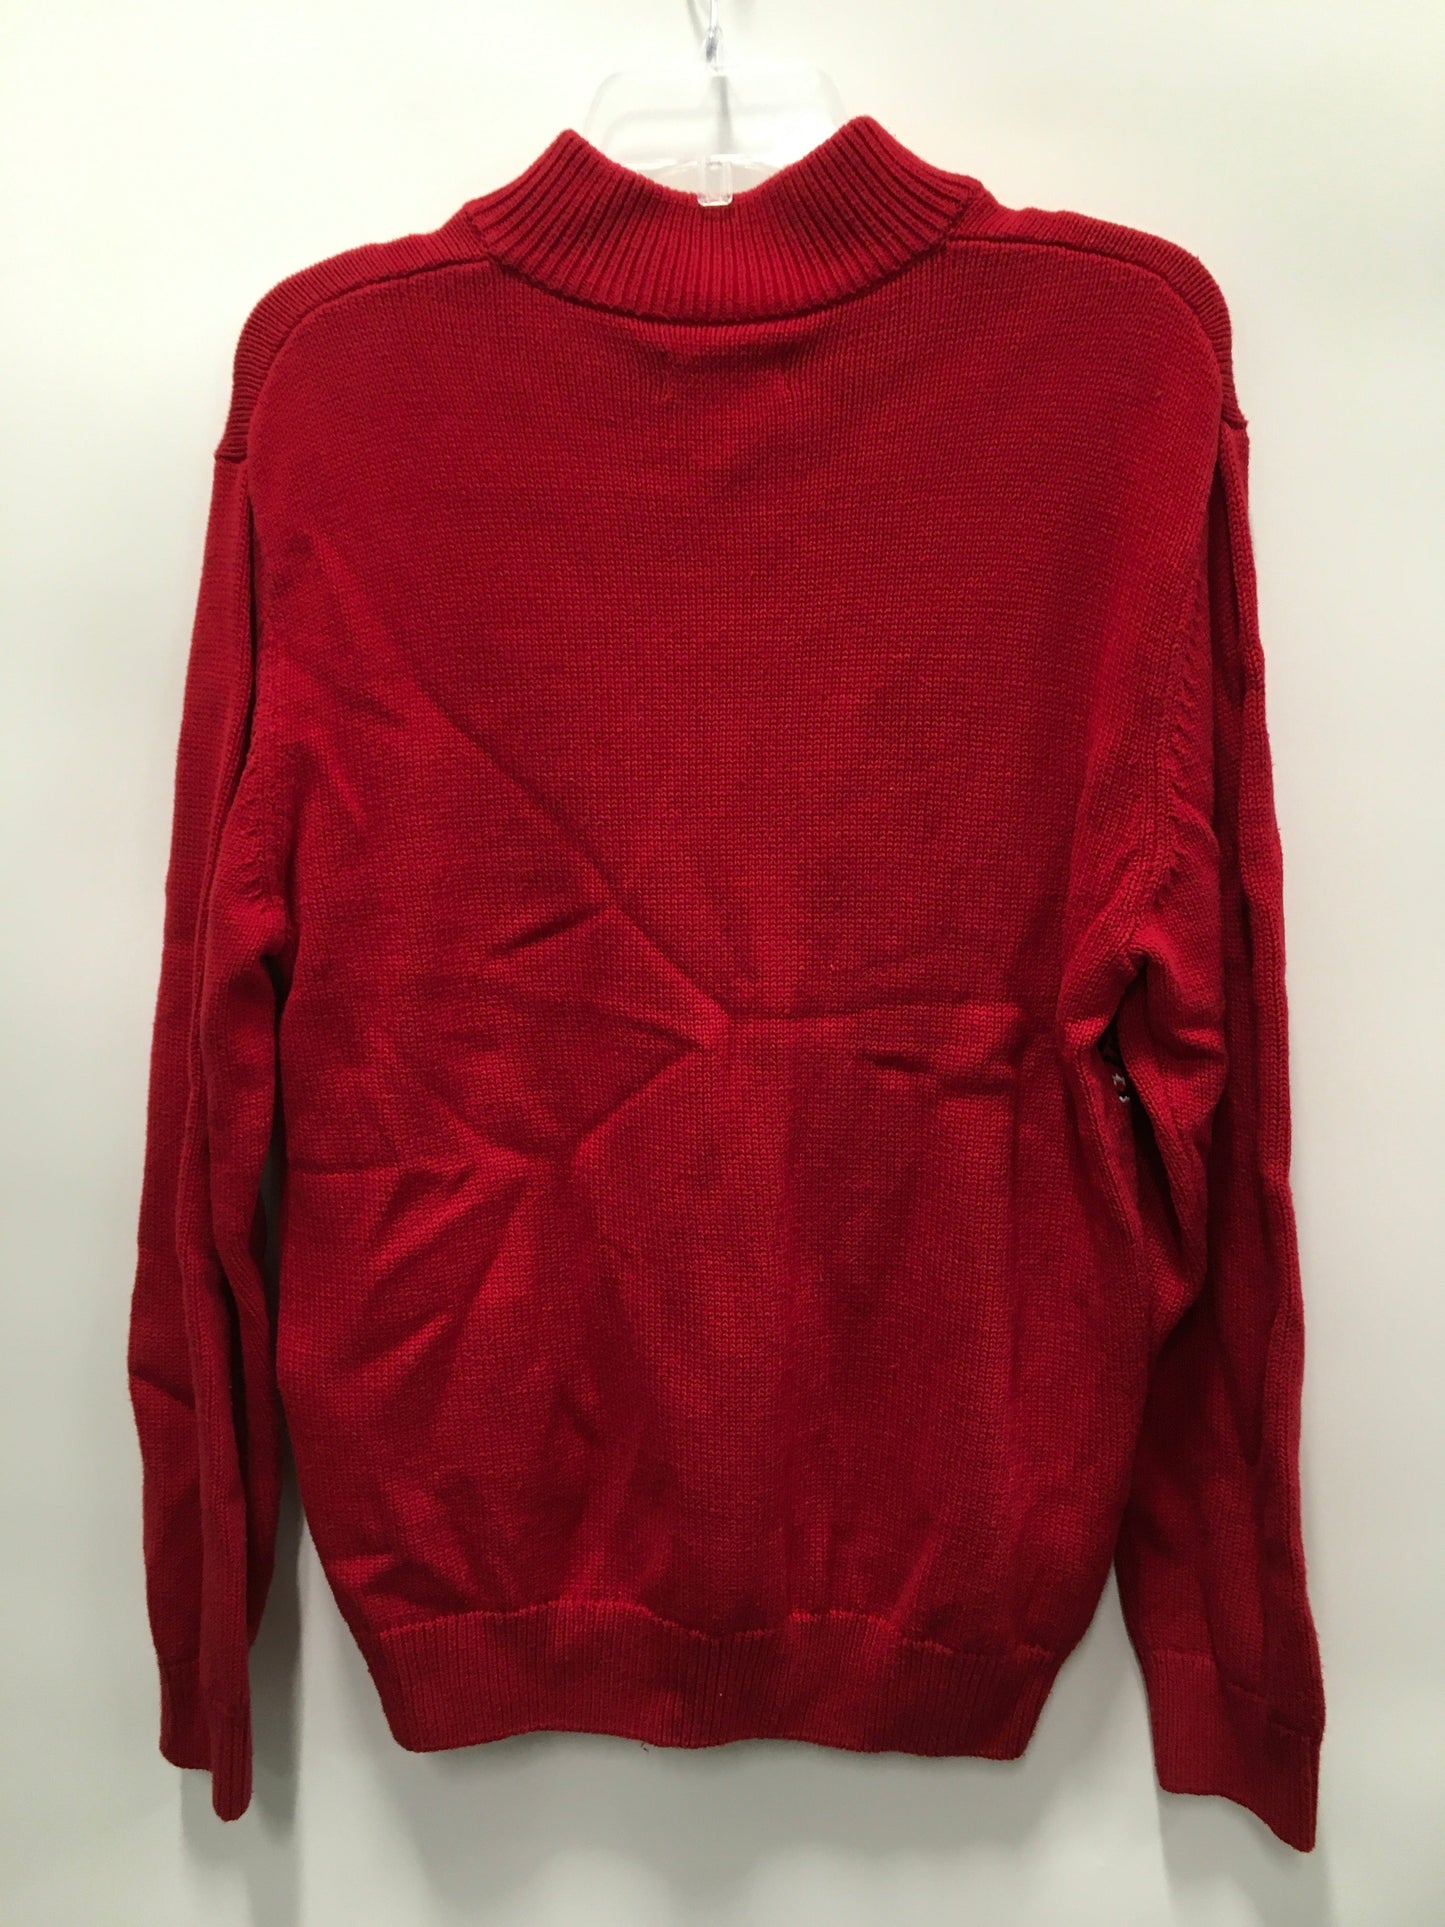 Red Sweater Chaps, Size M